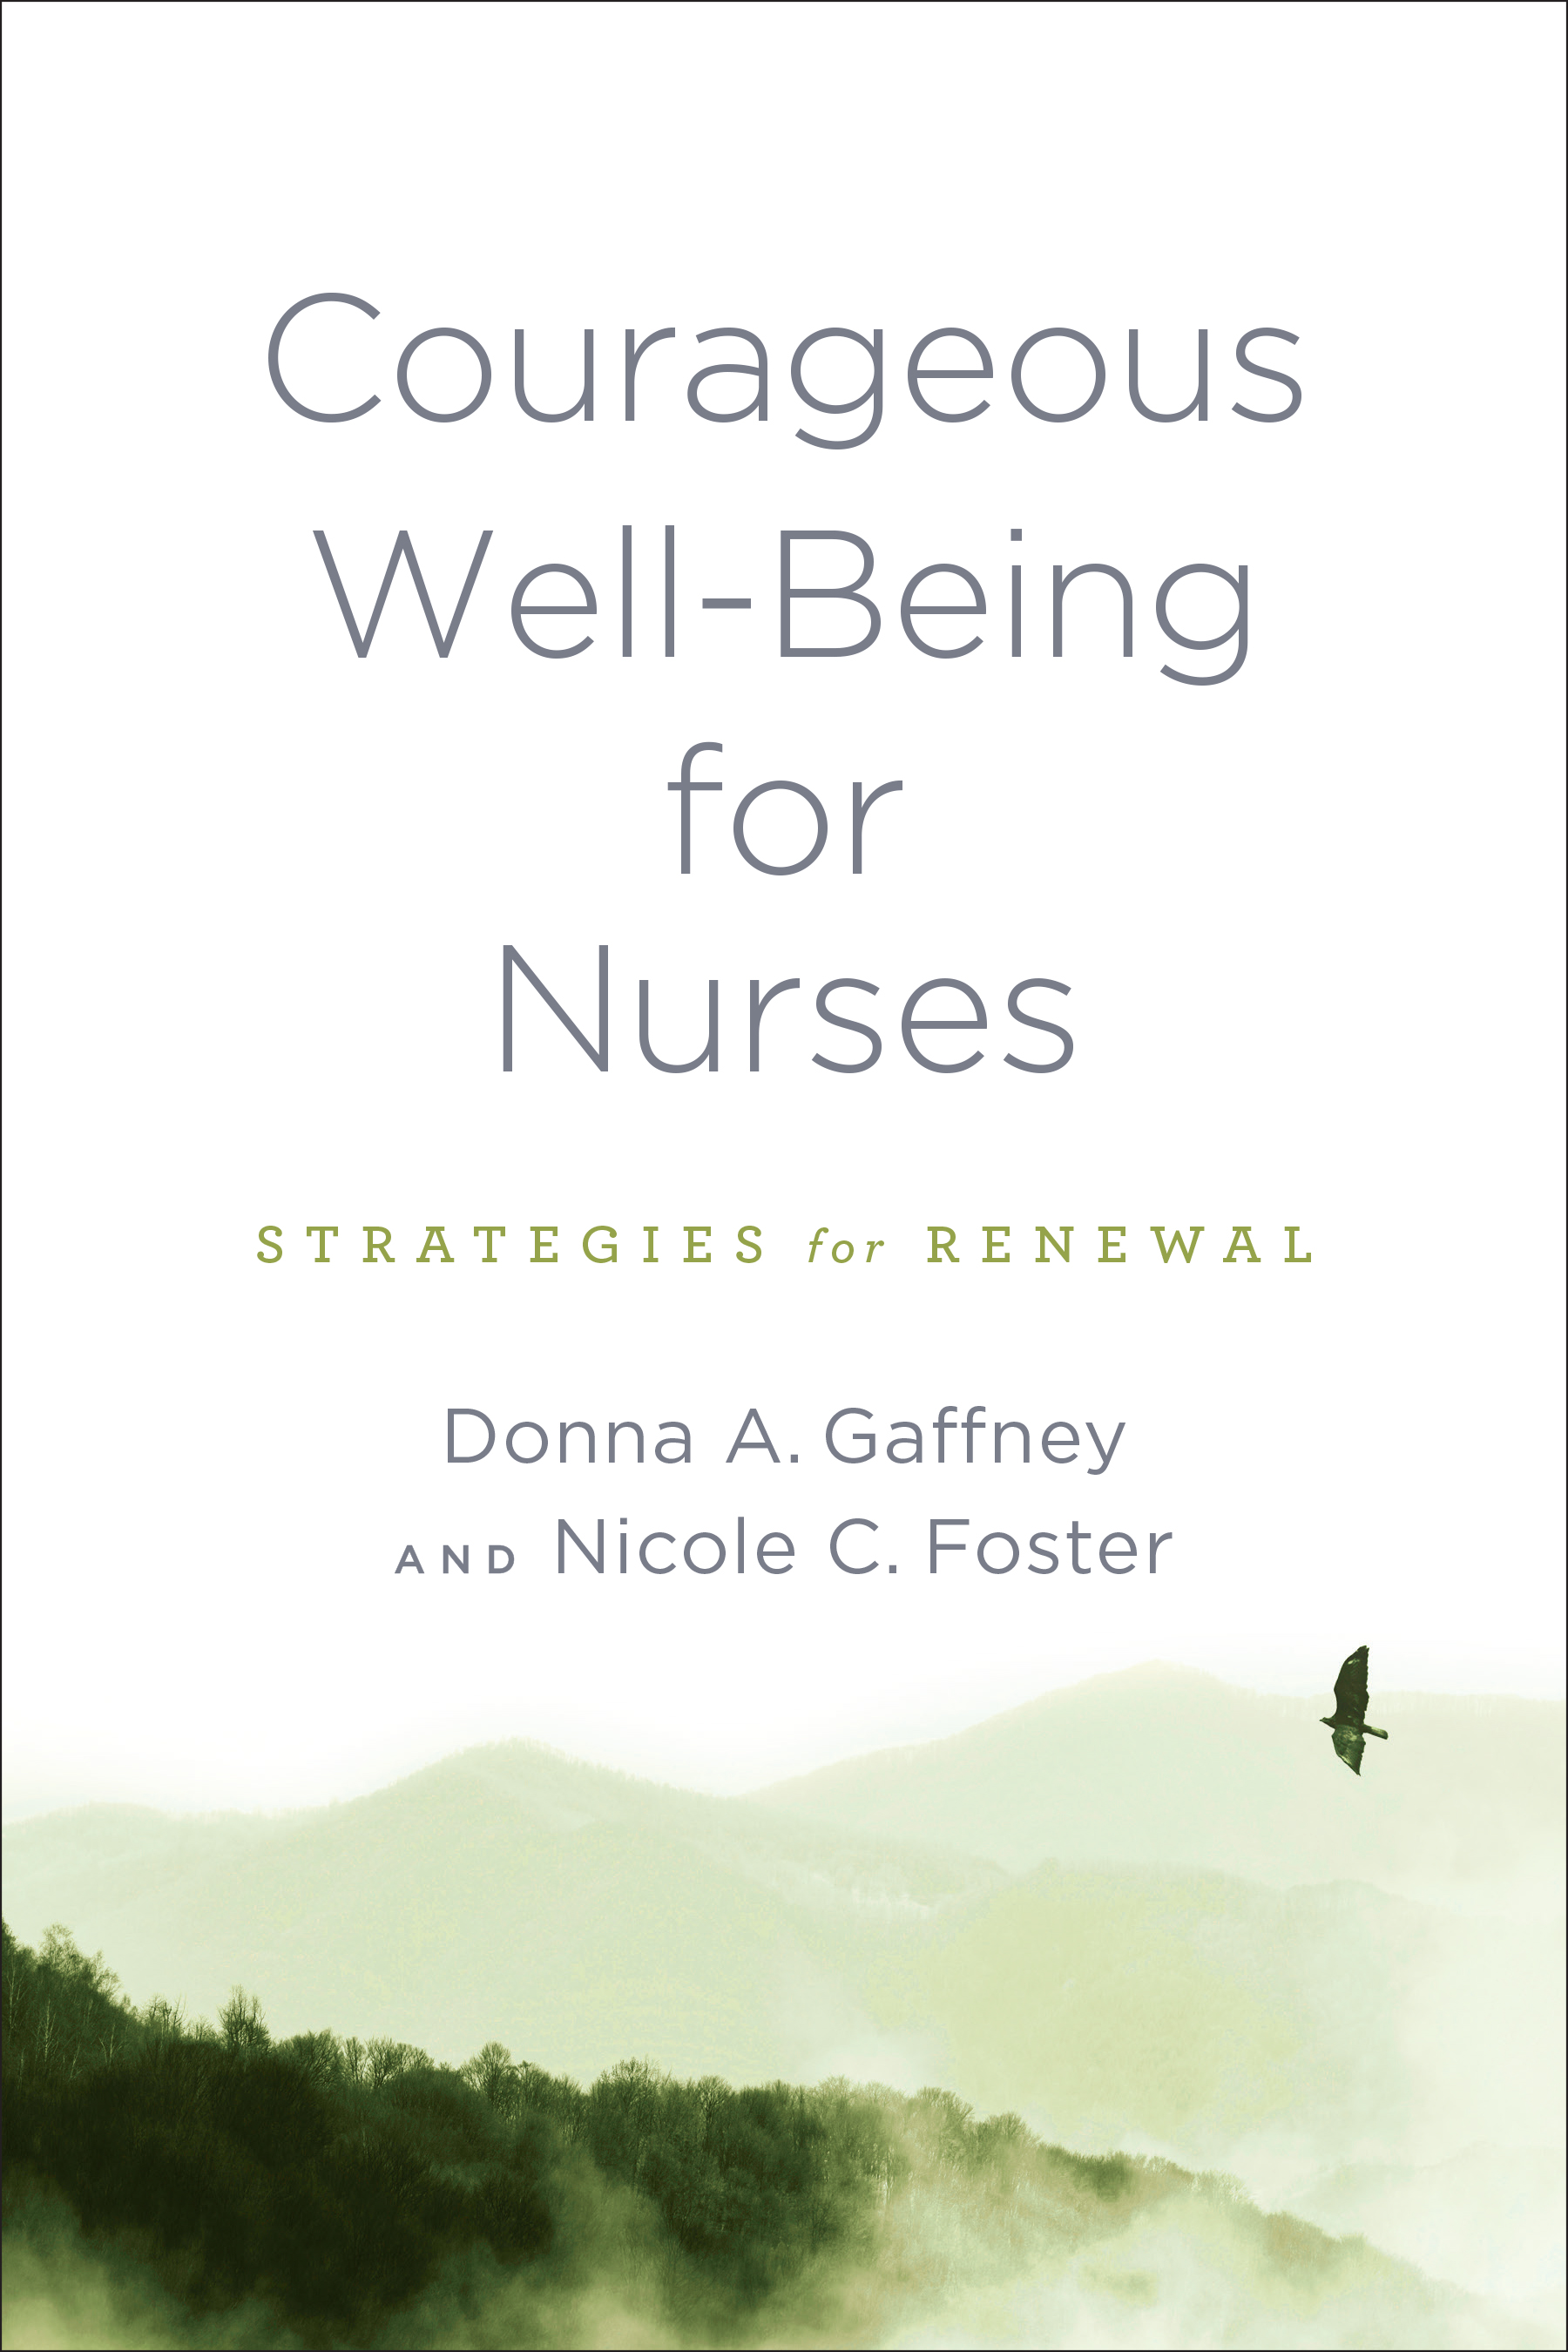 COURAGEOUS WELL-BEING FOR NURSES : STRATEGIES FOR RENEWAL